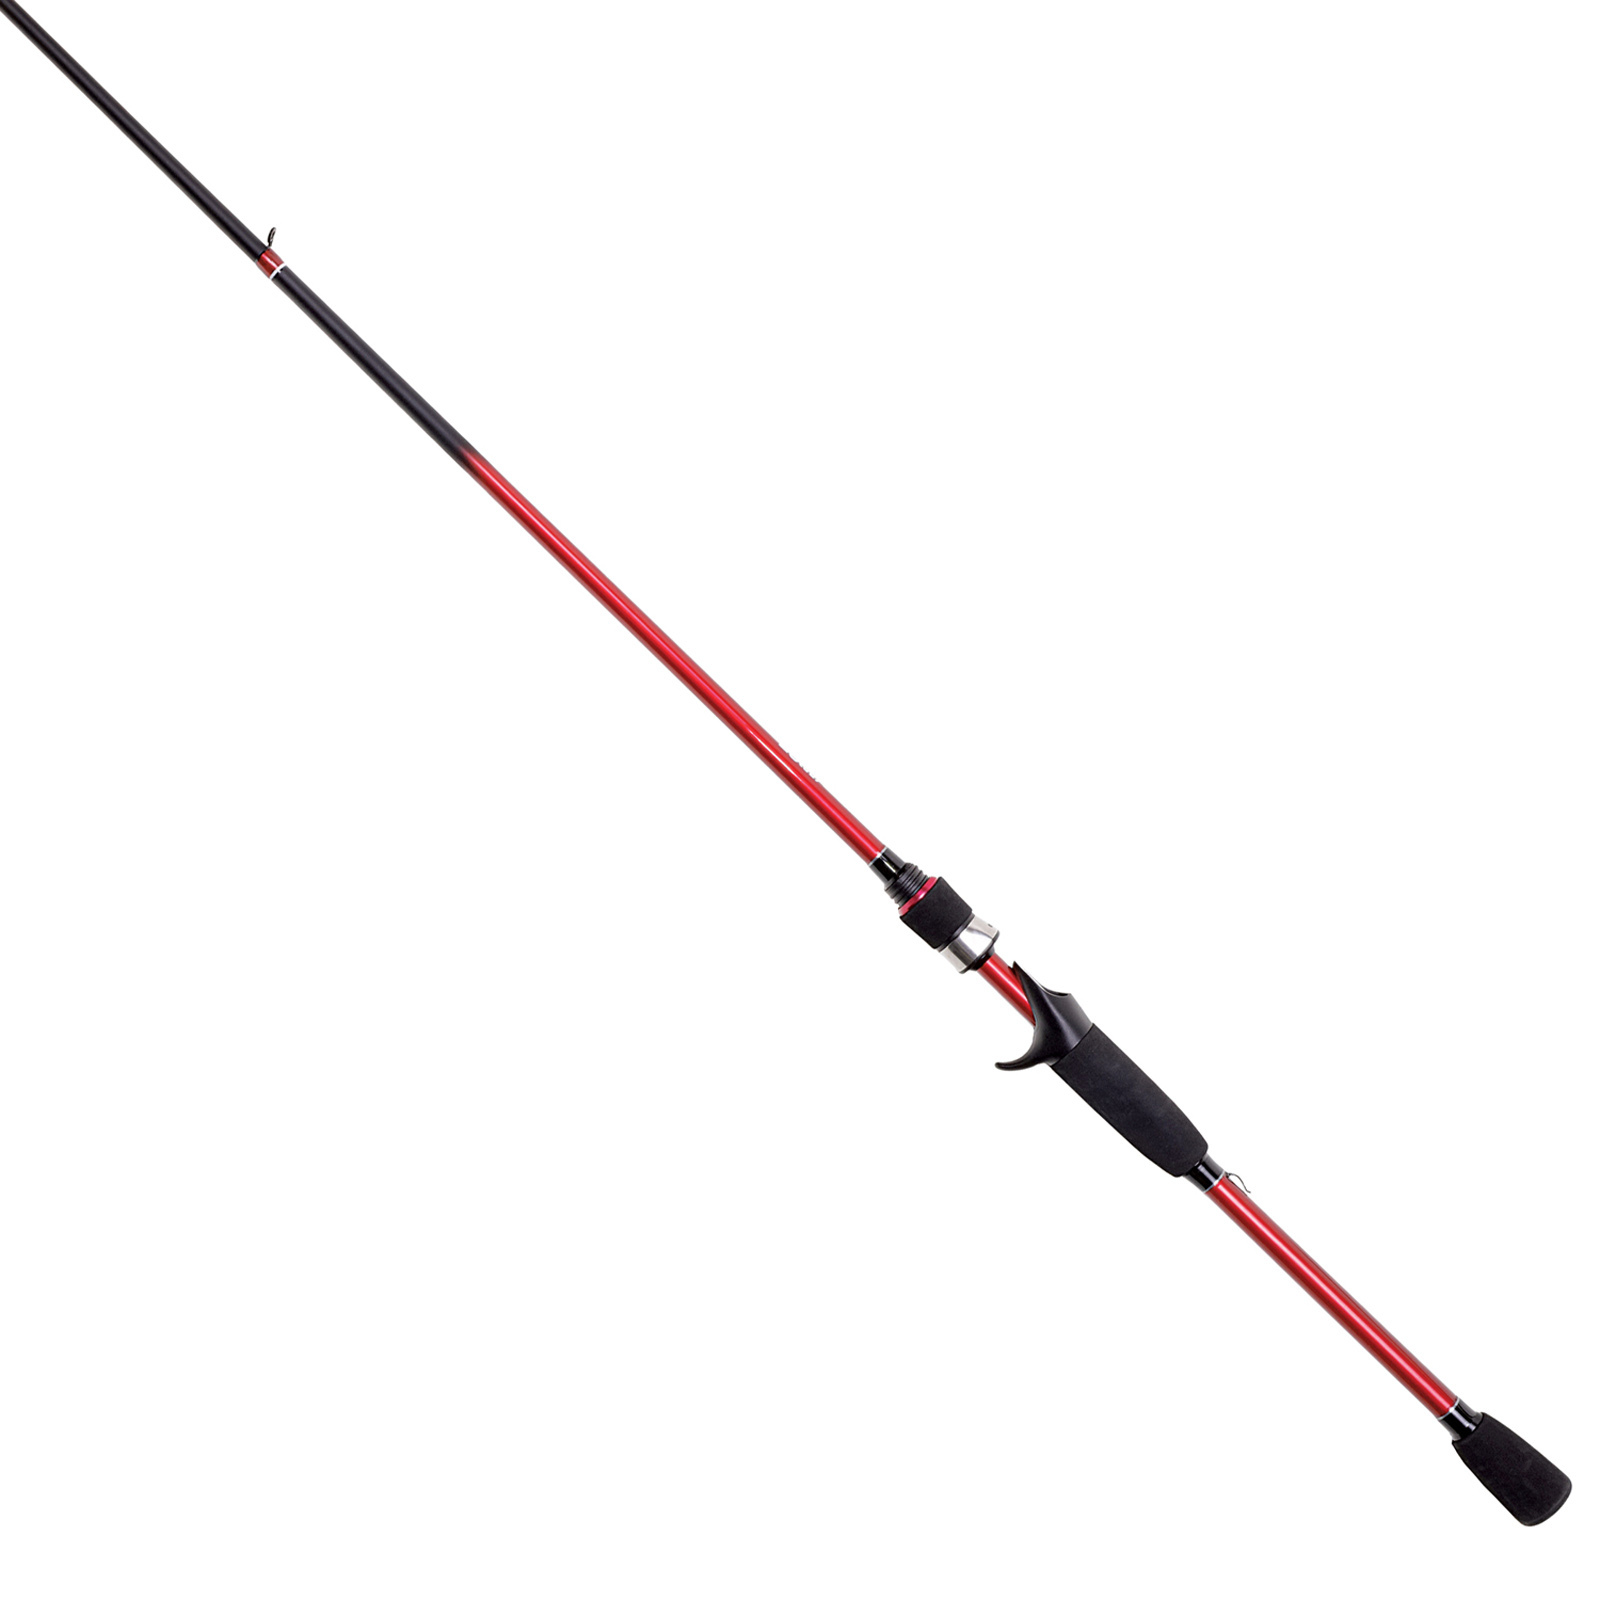 Eagle Claw Ec2.5 Bass Rod, Medium, Fast, Casting - For Spinnerbait/Topwater  EC2B7MFC1 , $4.00 Off with Free S&H — CampSaver